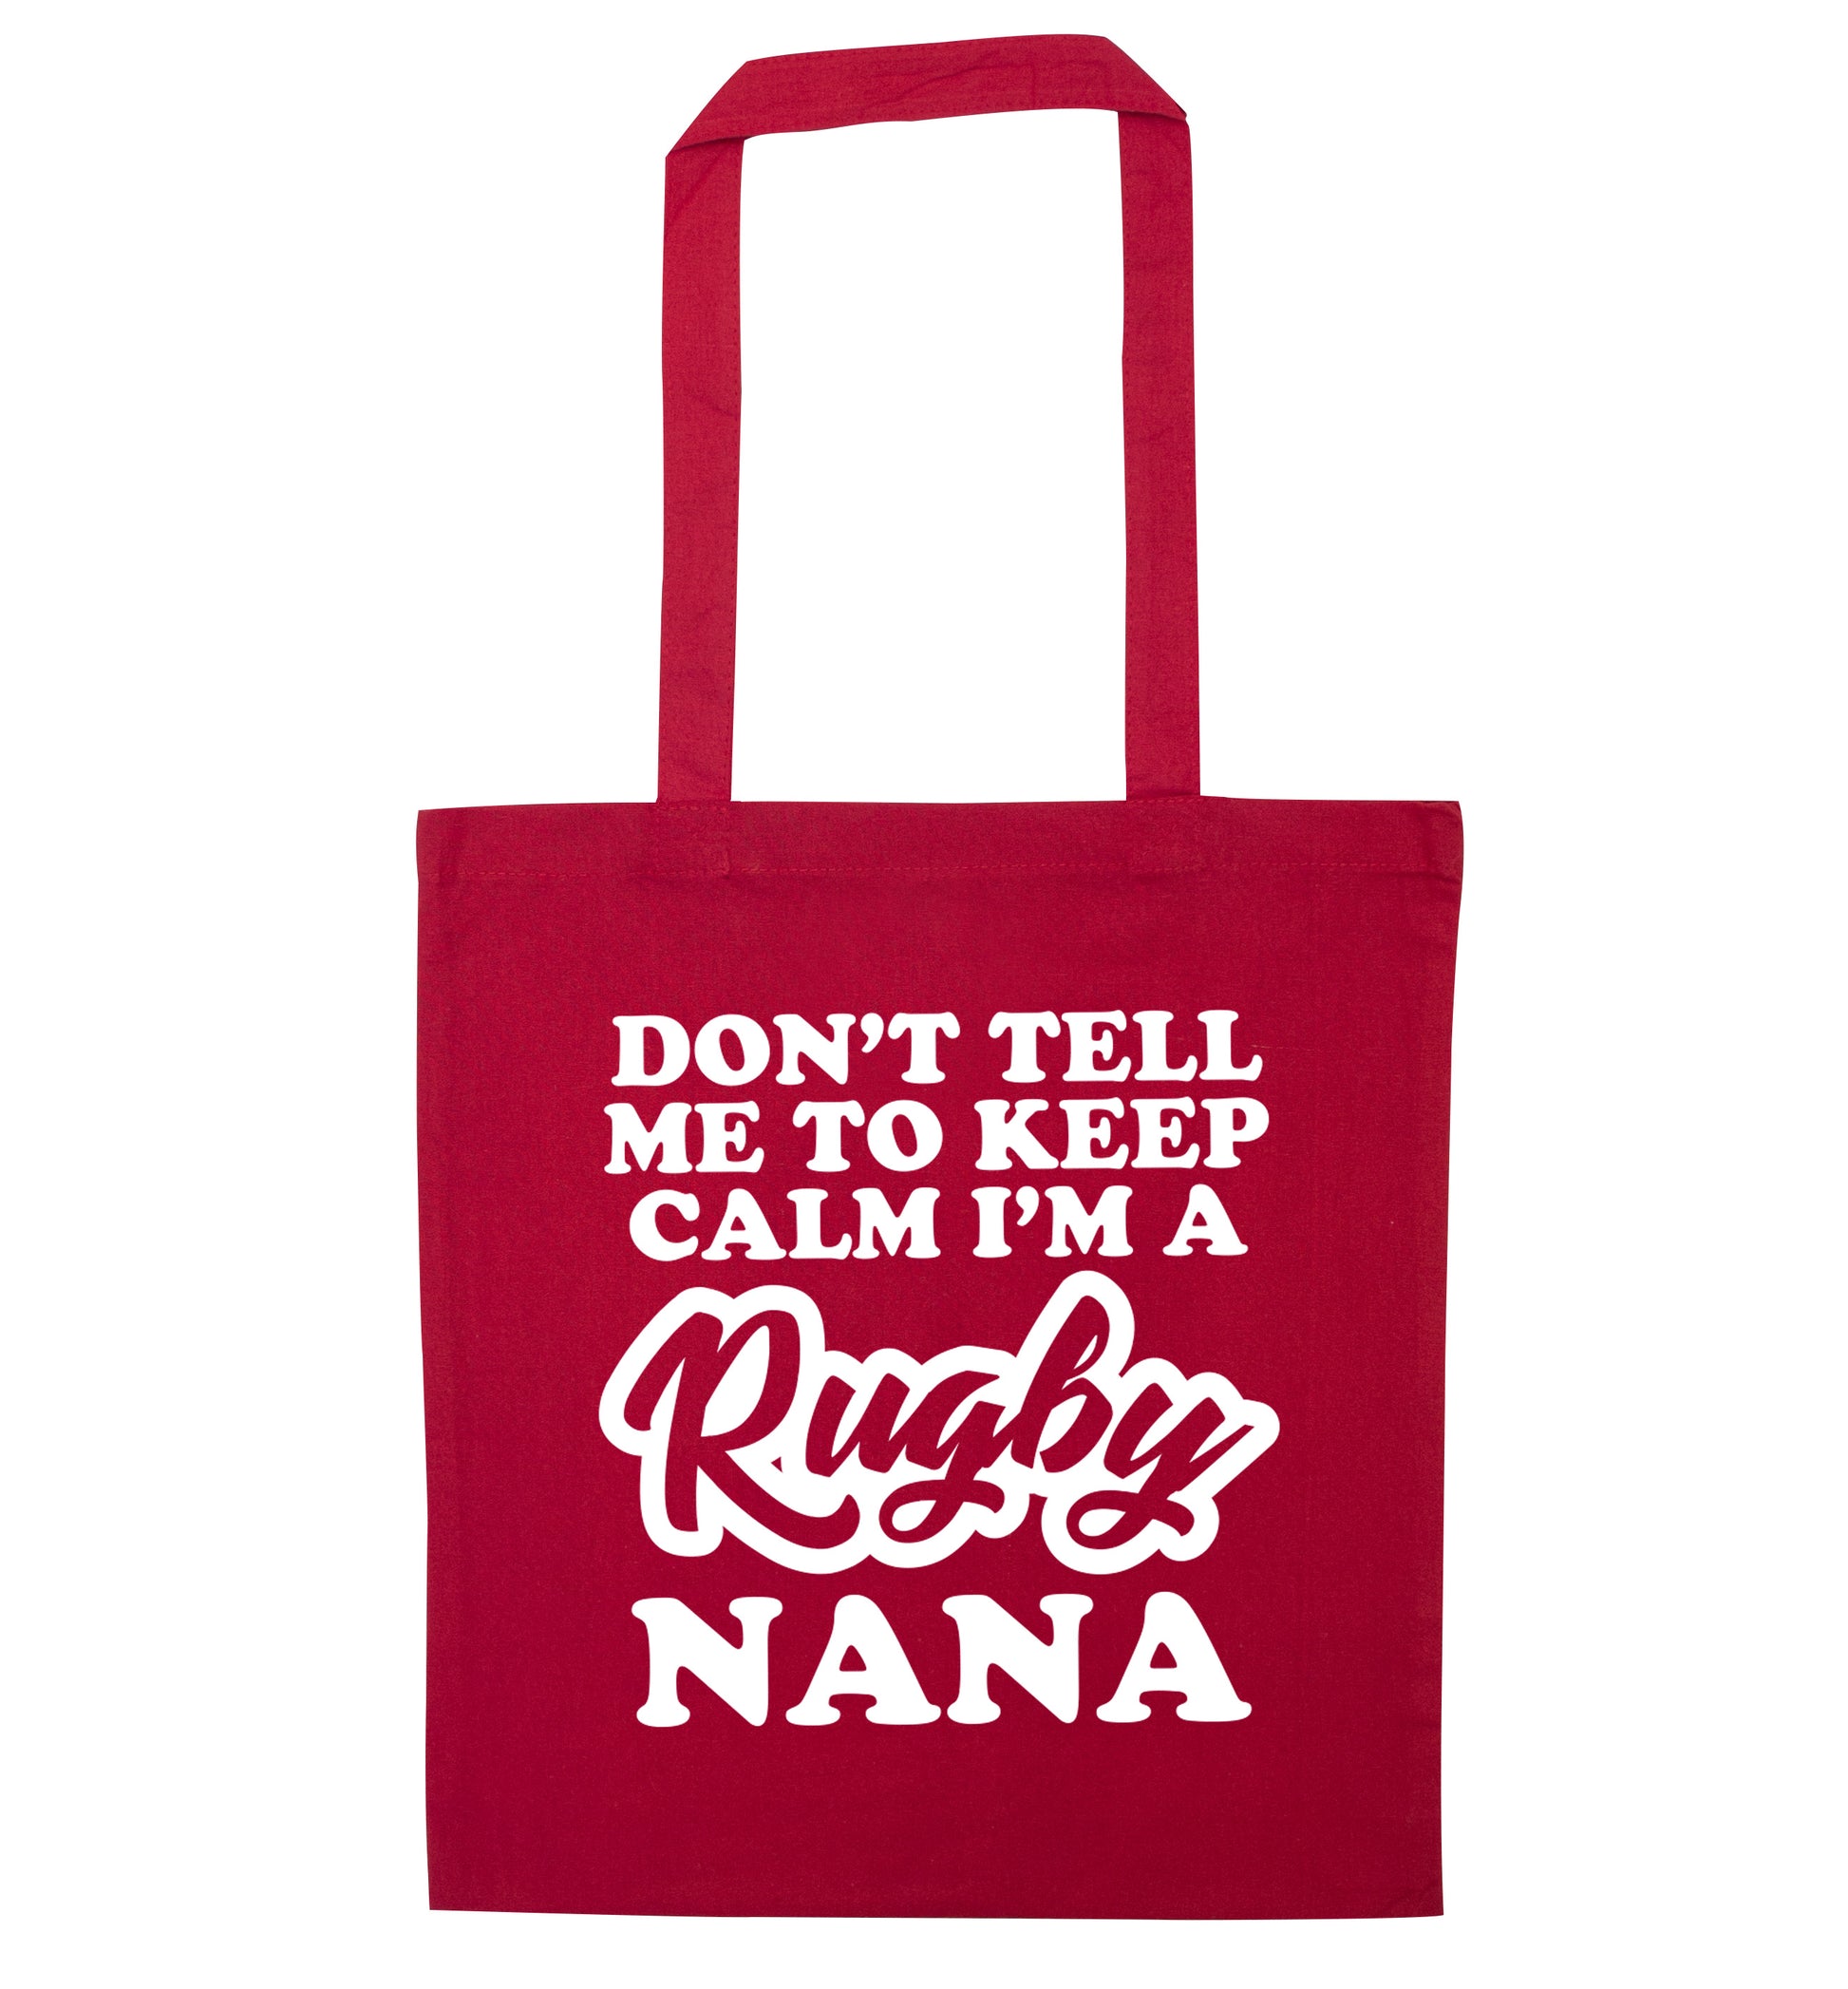 Don't tell me to keep calm I'm a rugby nana red tote bag